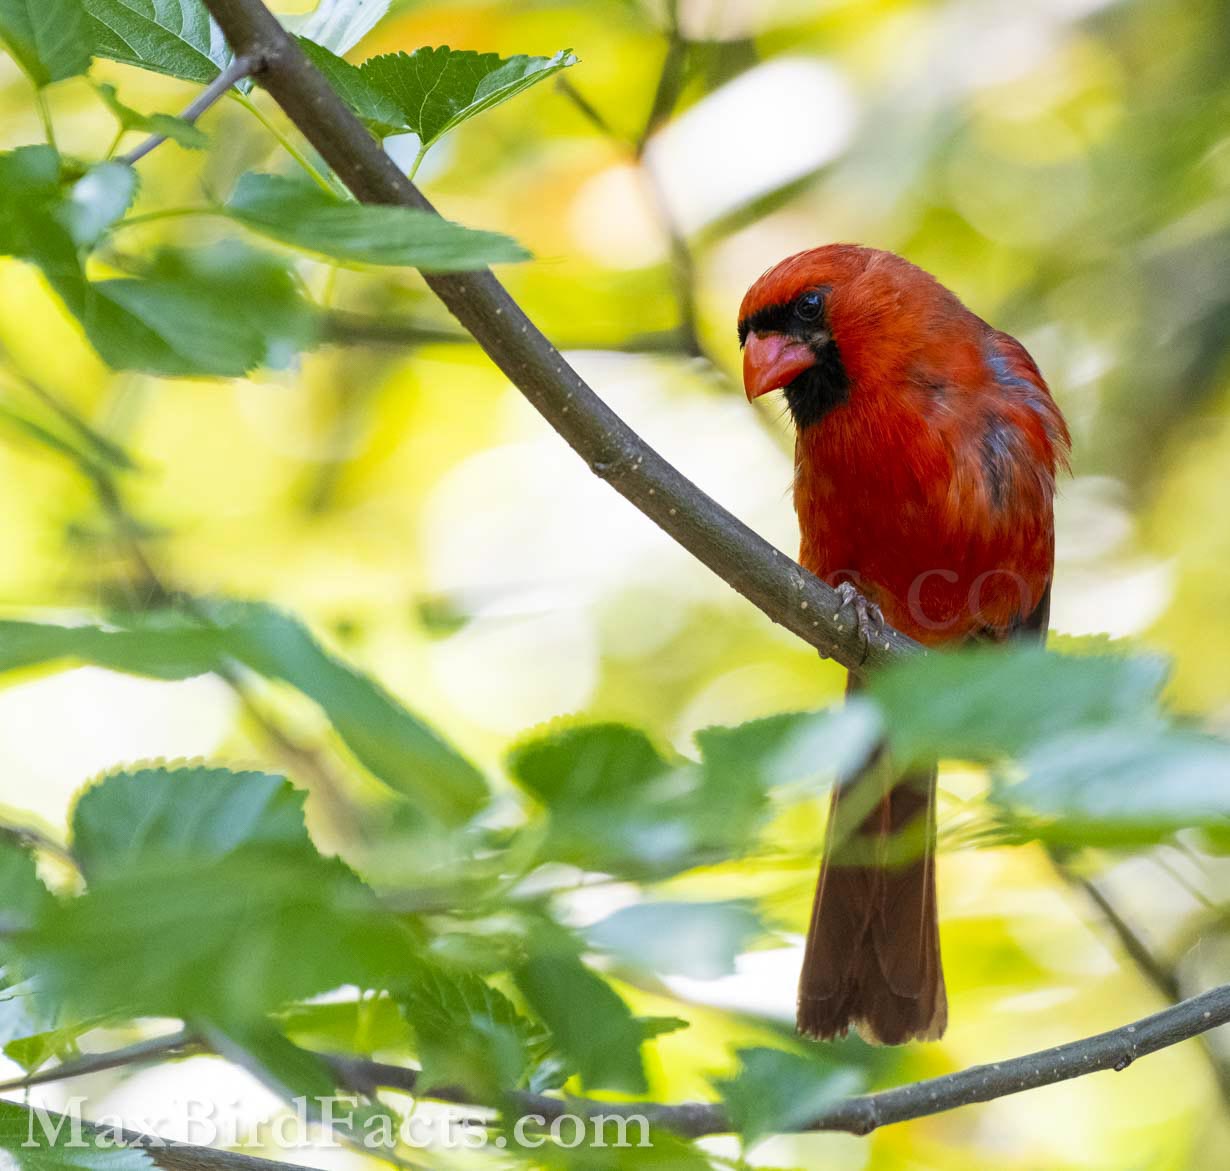 Here, we have an adult male Northern Cardinal (Cardinalis cardinalis). His bright red plumage depends on him finding good sources of berries rich in beta-carotenoids. (Washington, DC. 2023)